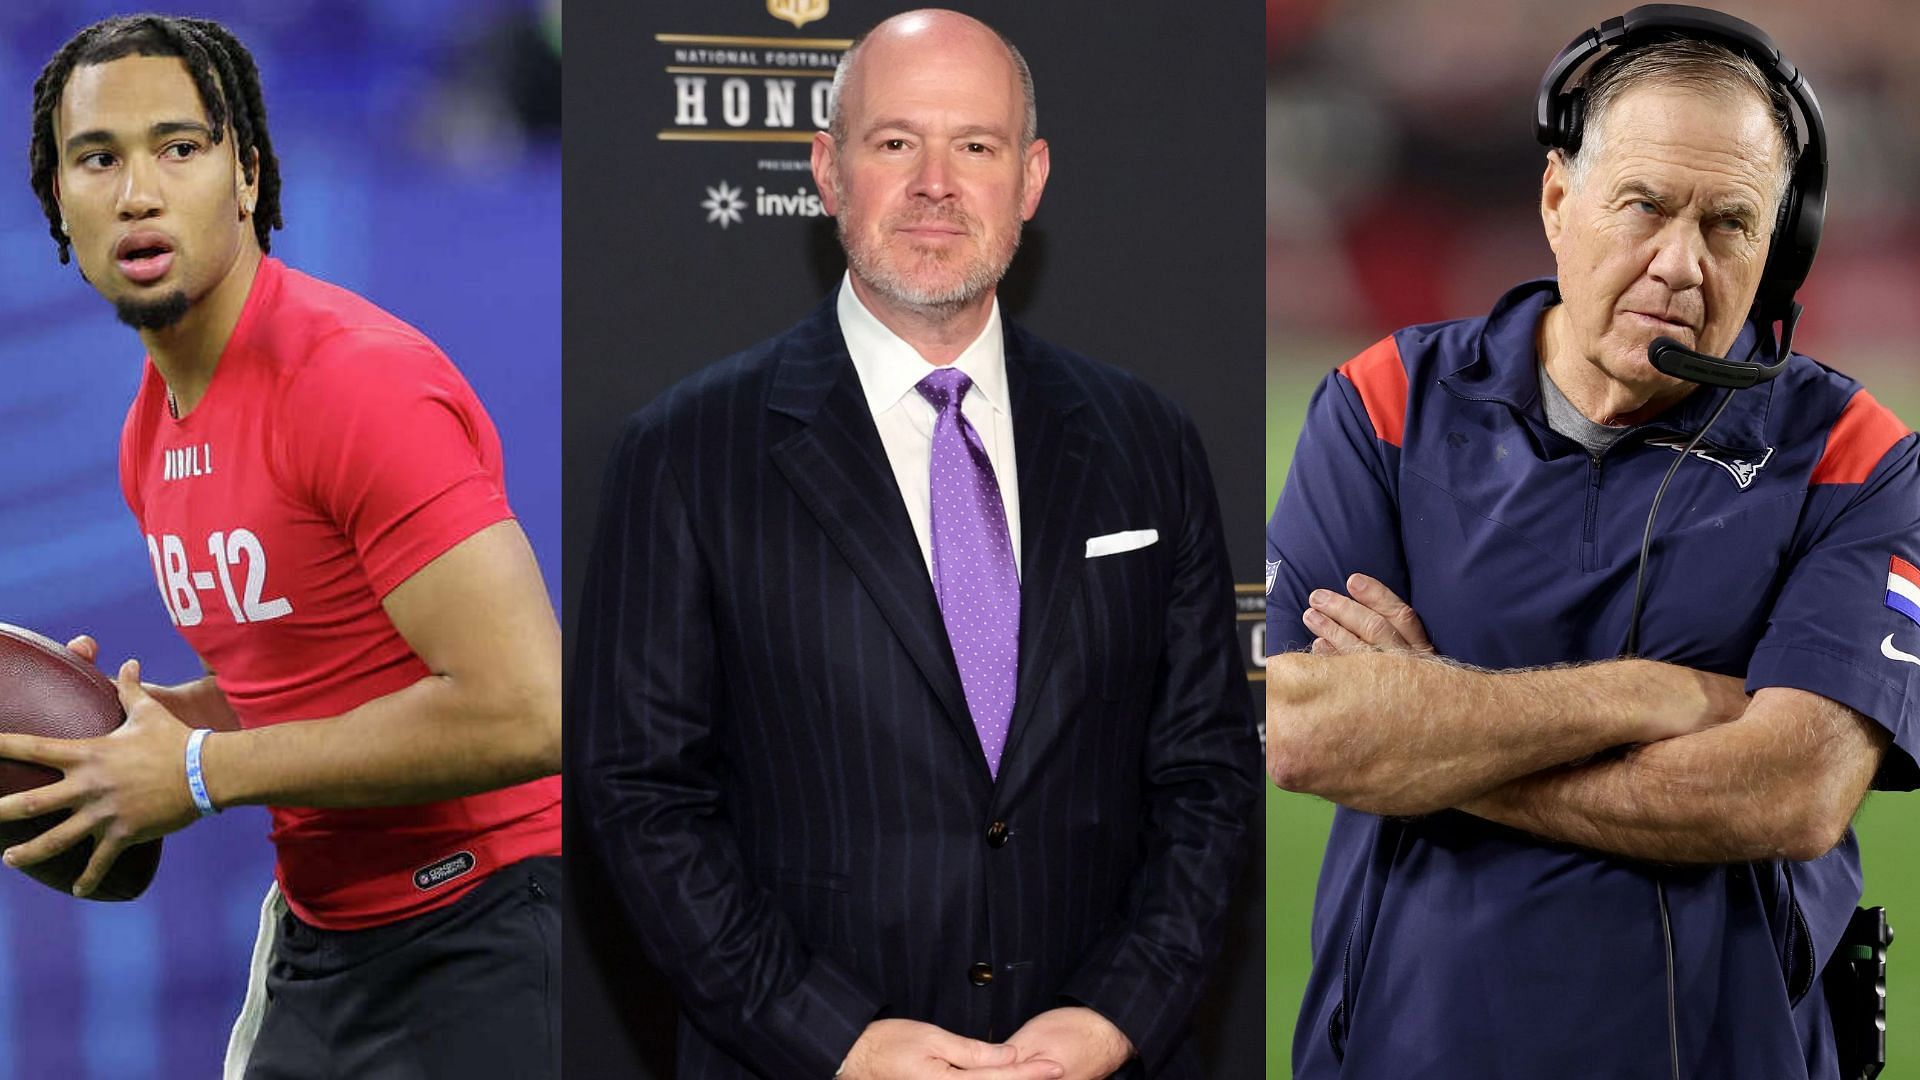 NFL Network anchor Rich Eisen contested a penalty call on Bill Belichick